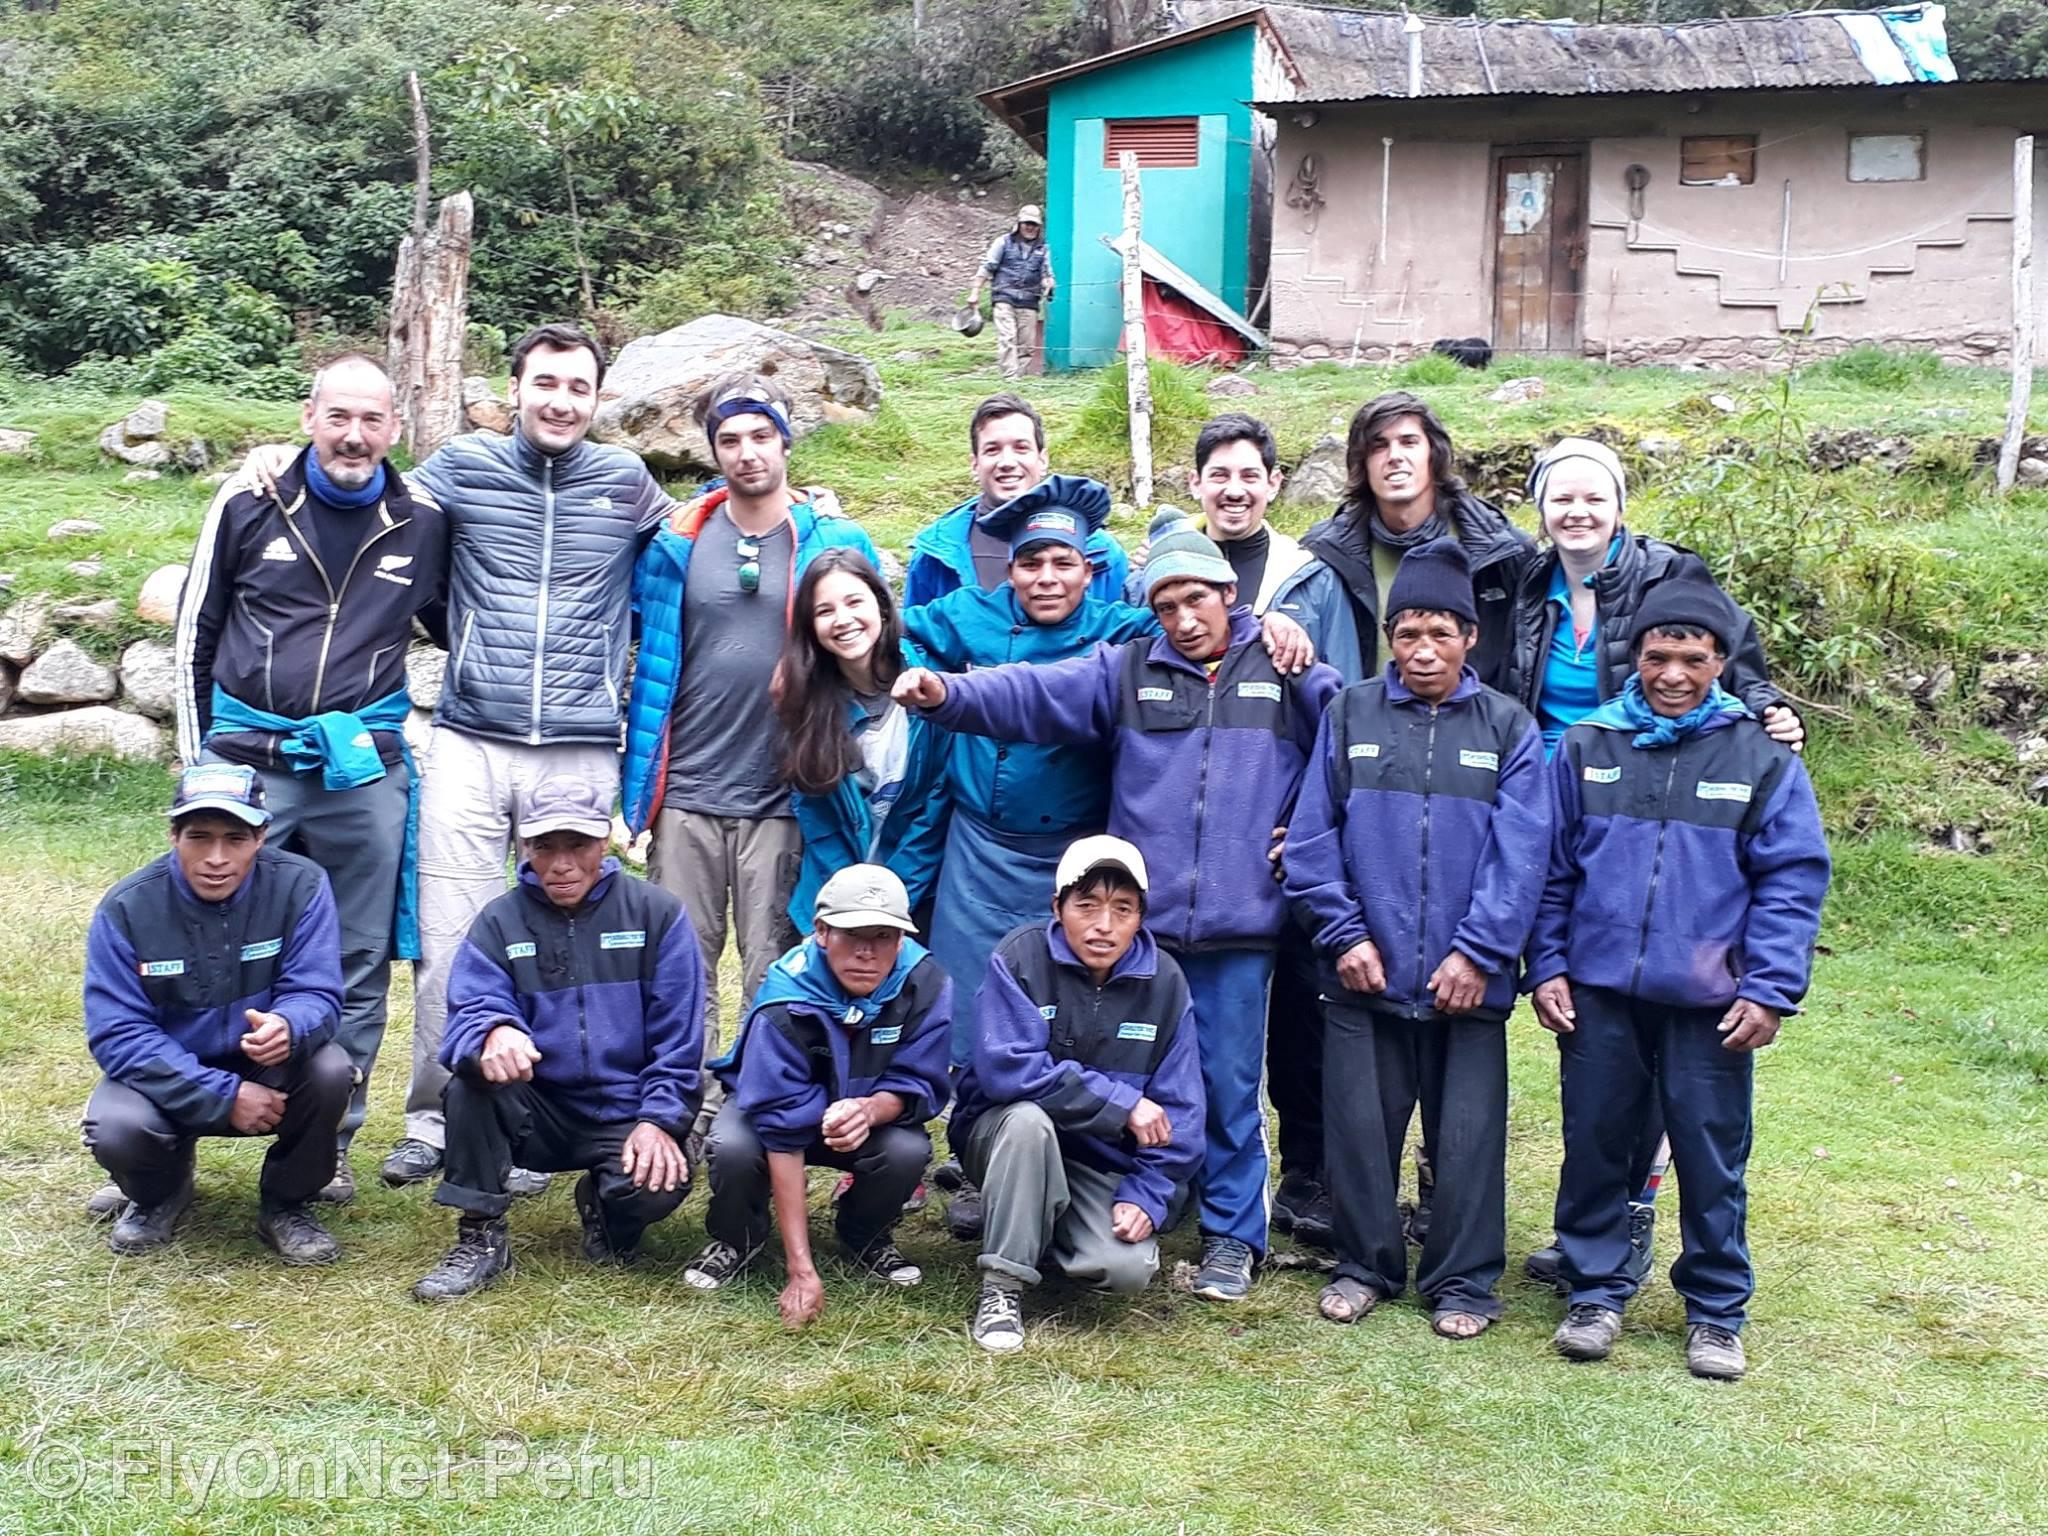 Photo Album: Our group of trekkers, Inca Trail